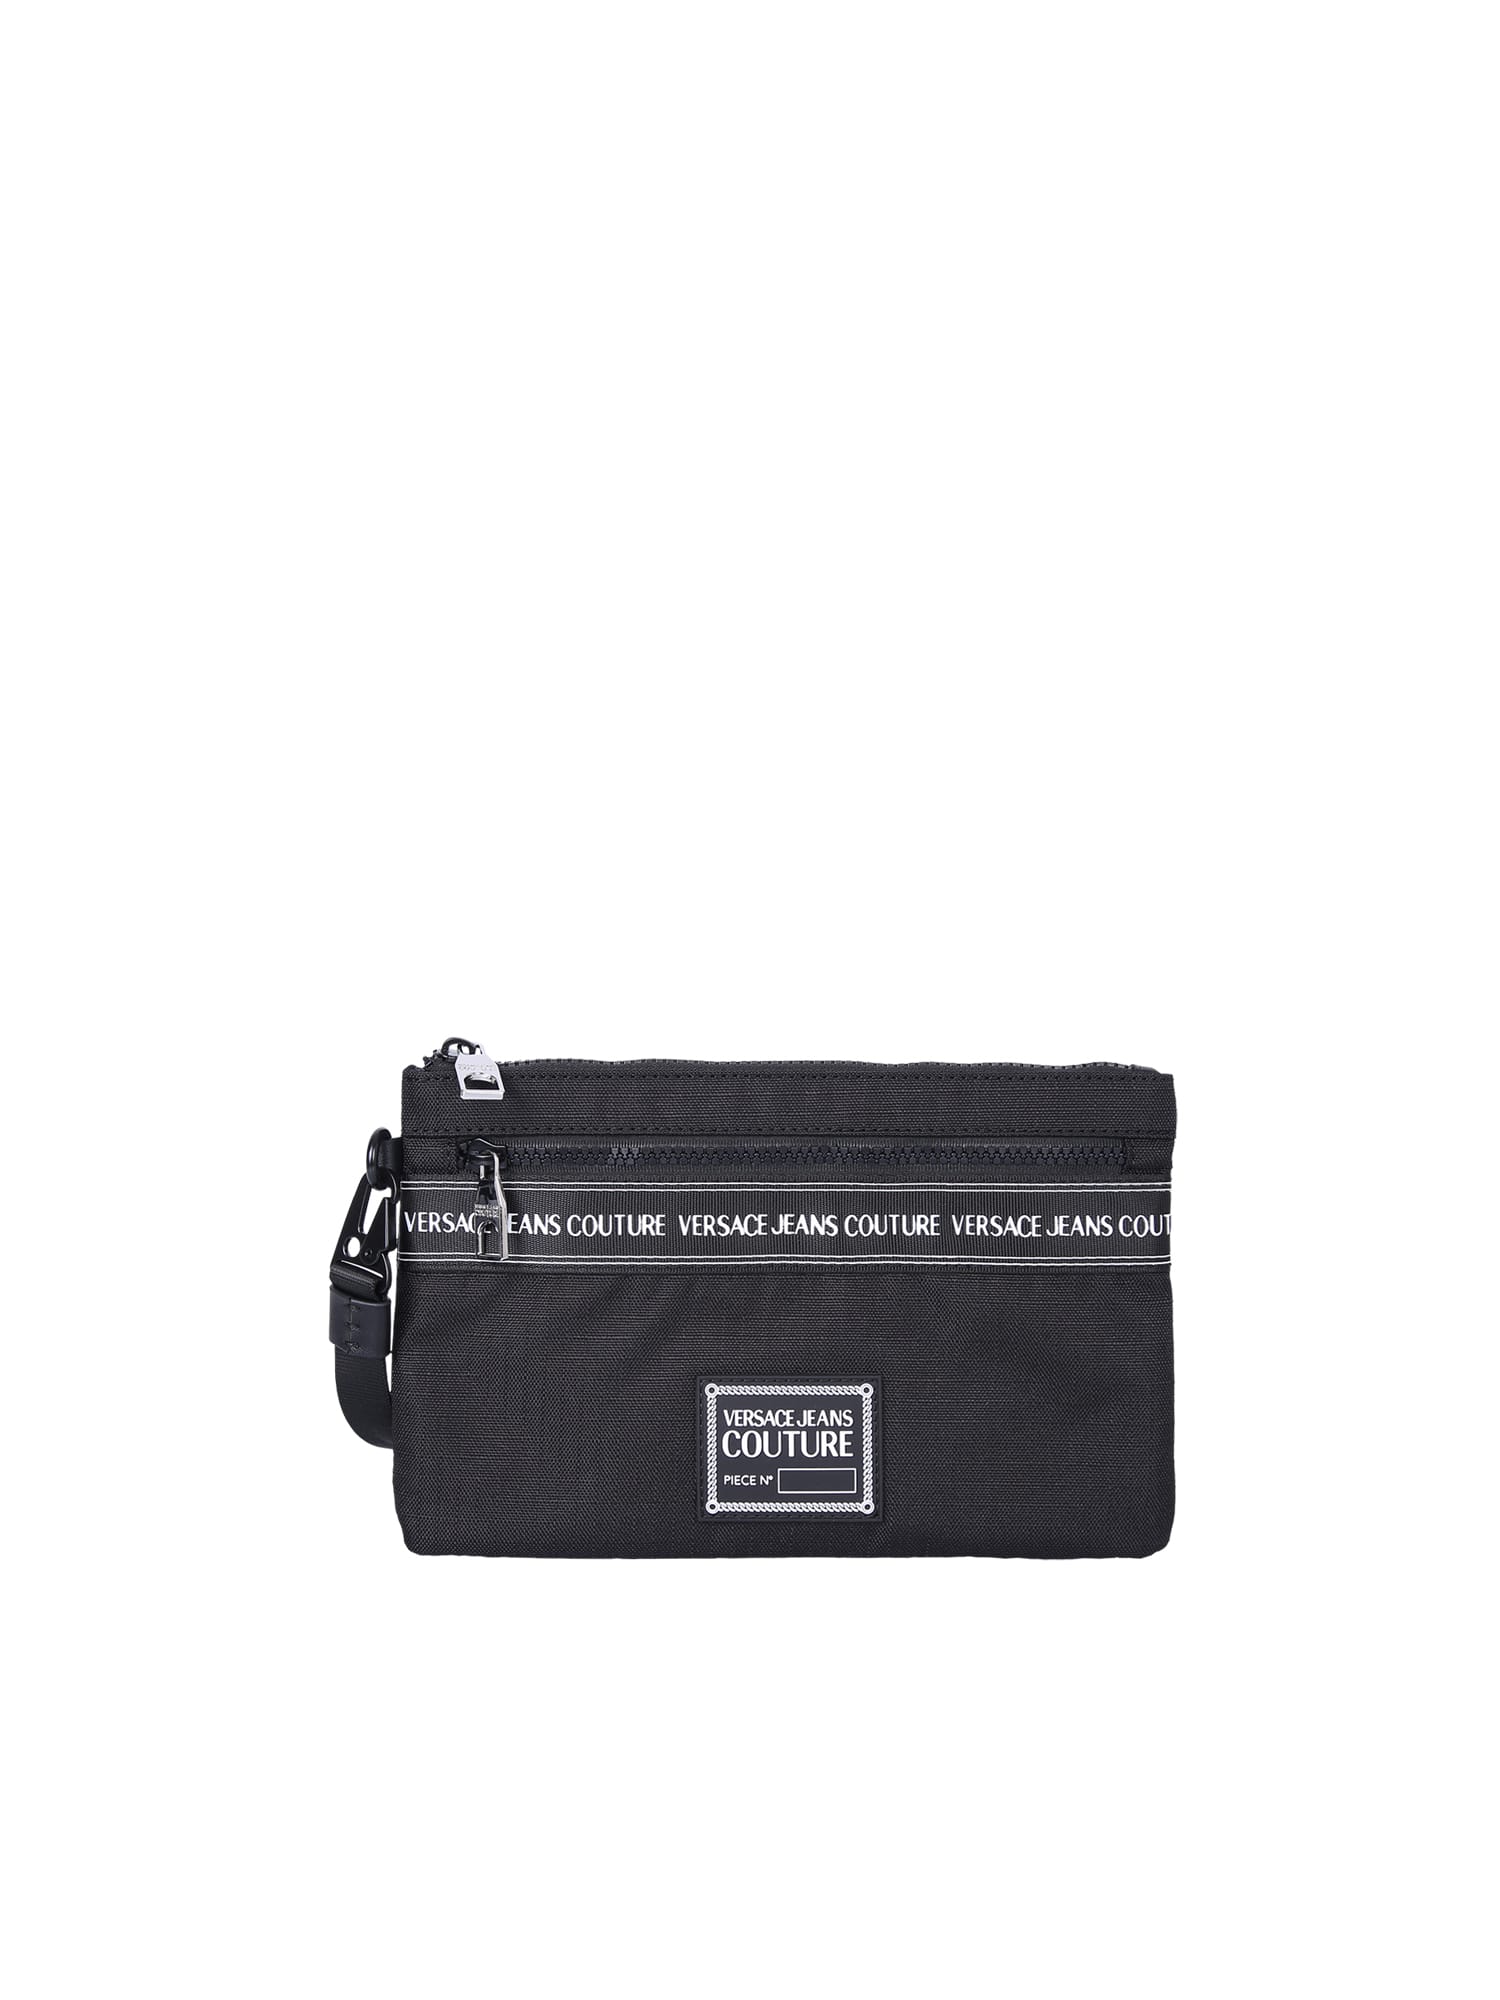 Versace Jeans Couture Branded Pouch